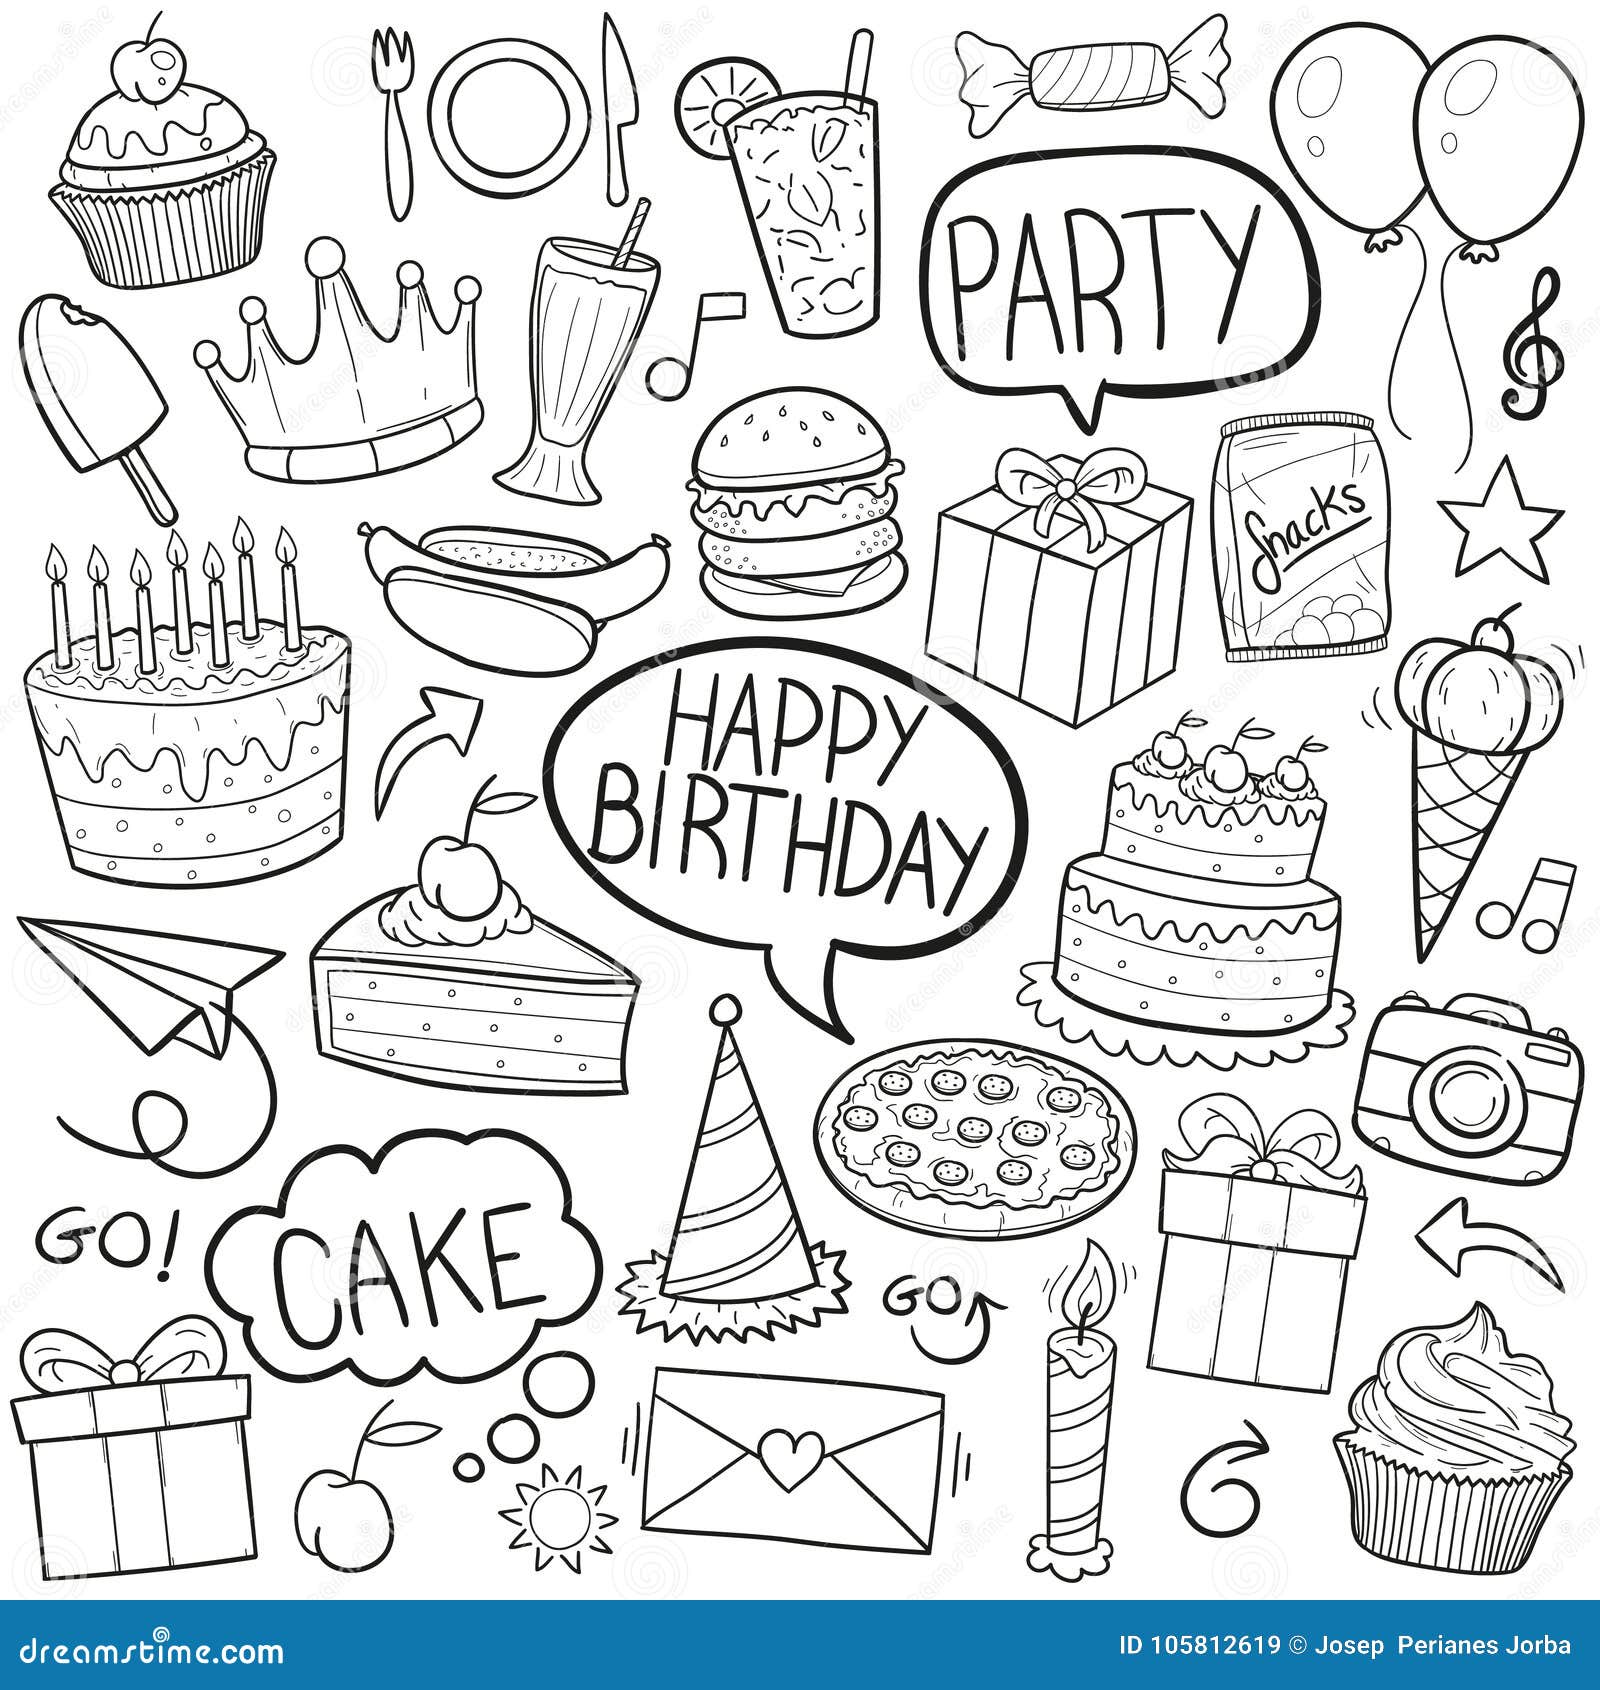 Happy Birthday Party Traditional Doodle Icons Sketch Hand Made Design  Vector Stock Vector  Illustration of birthday hand 105812619